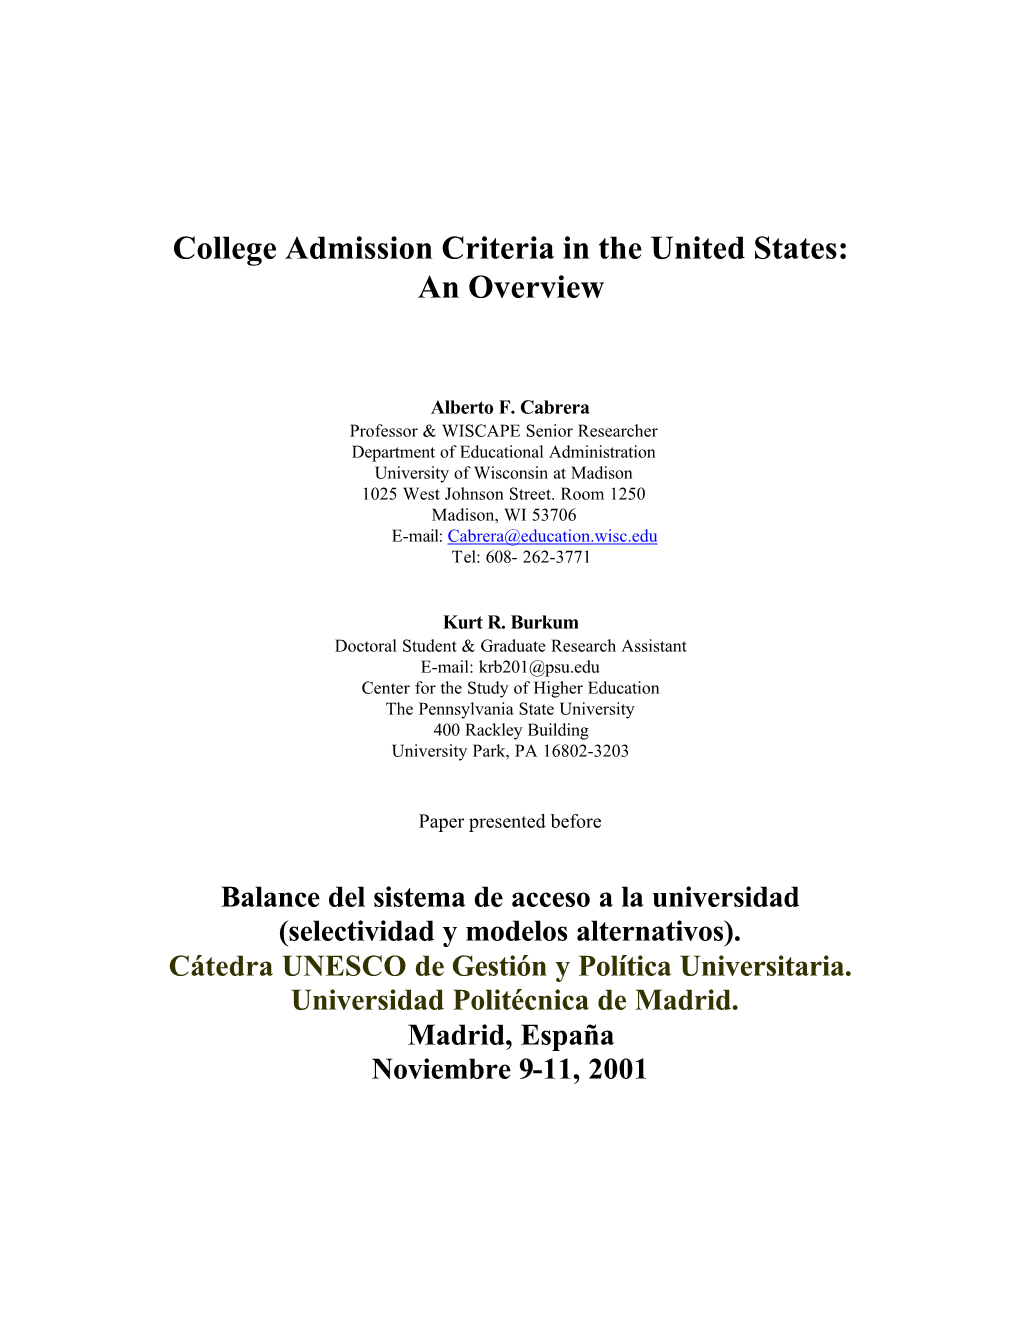 College Admission Criteria in the United States: an Overview